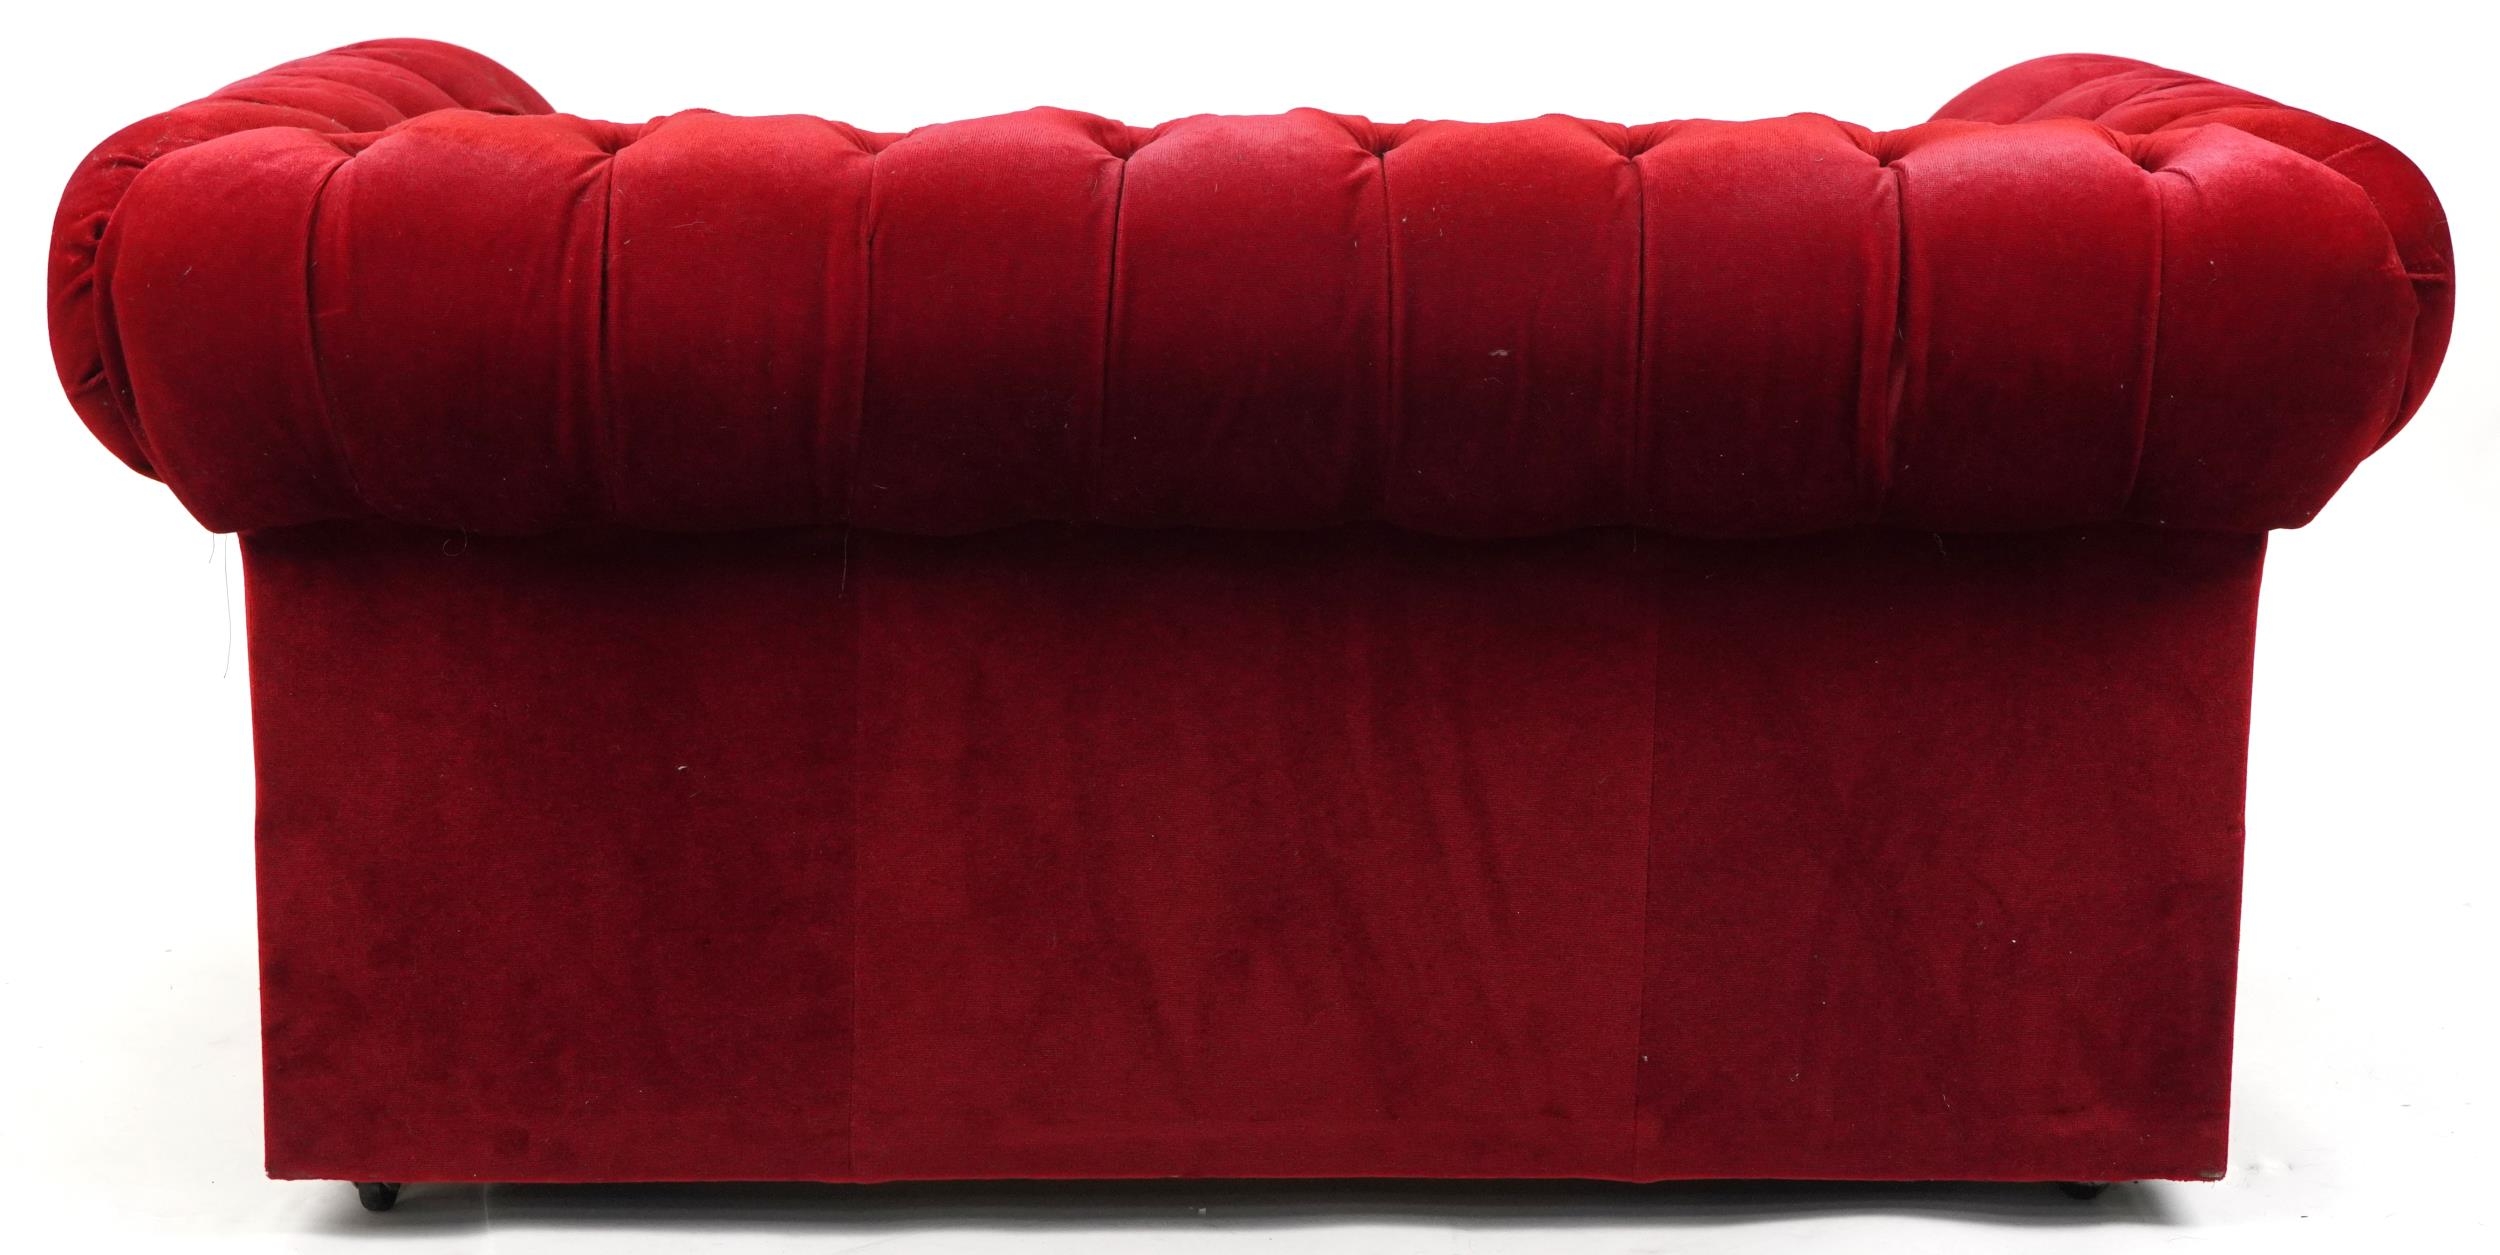 Chesterfield two seater settee/sofa bed with red button back upholstery, 73cm H x 152cm W x 88cm D - Image 4 of 4